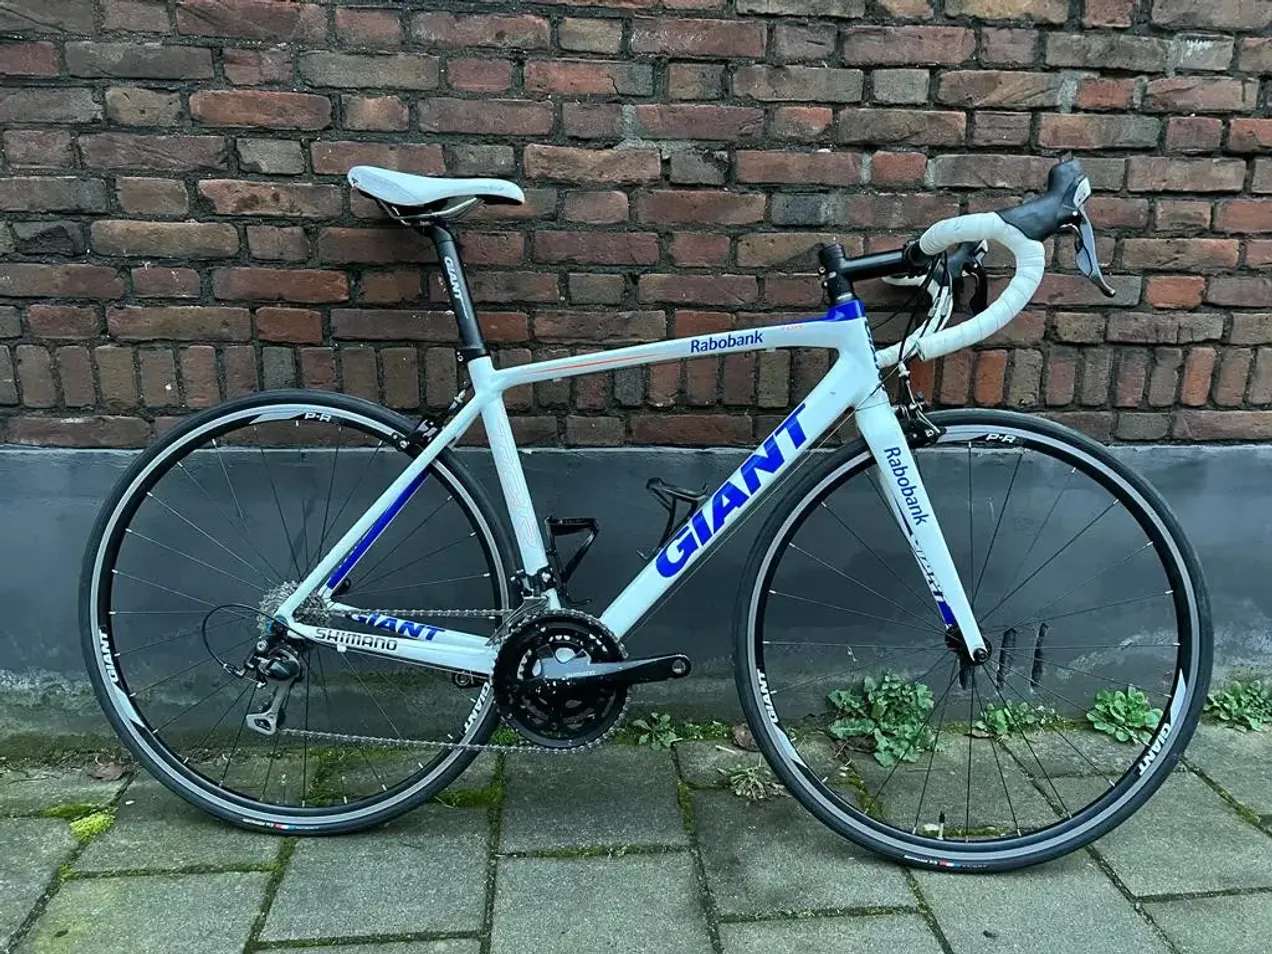 Giant TCR Rabobank Team Edition used in M | buycycle